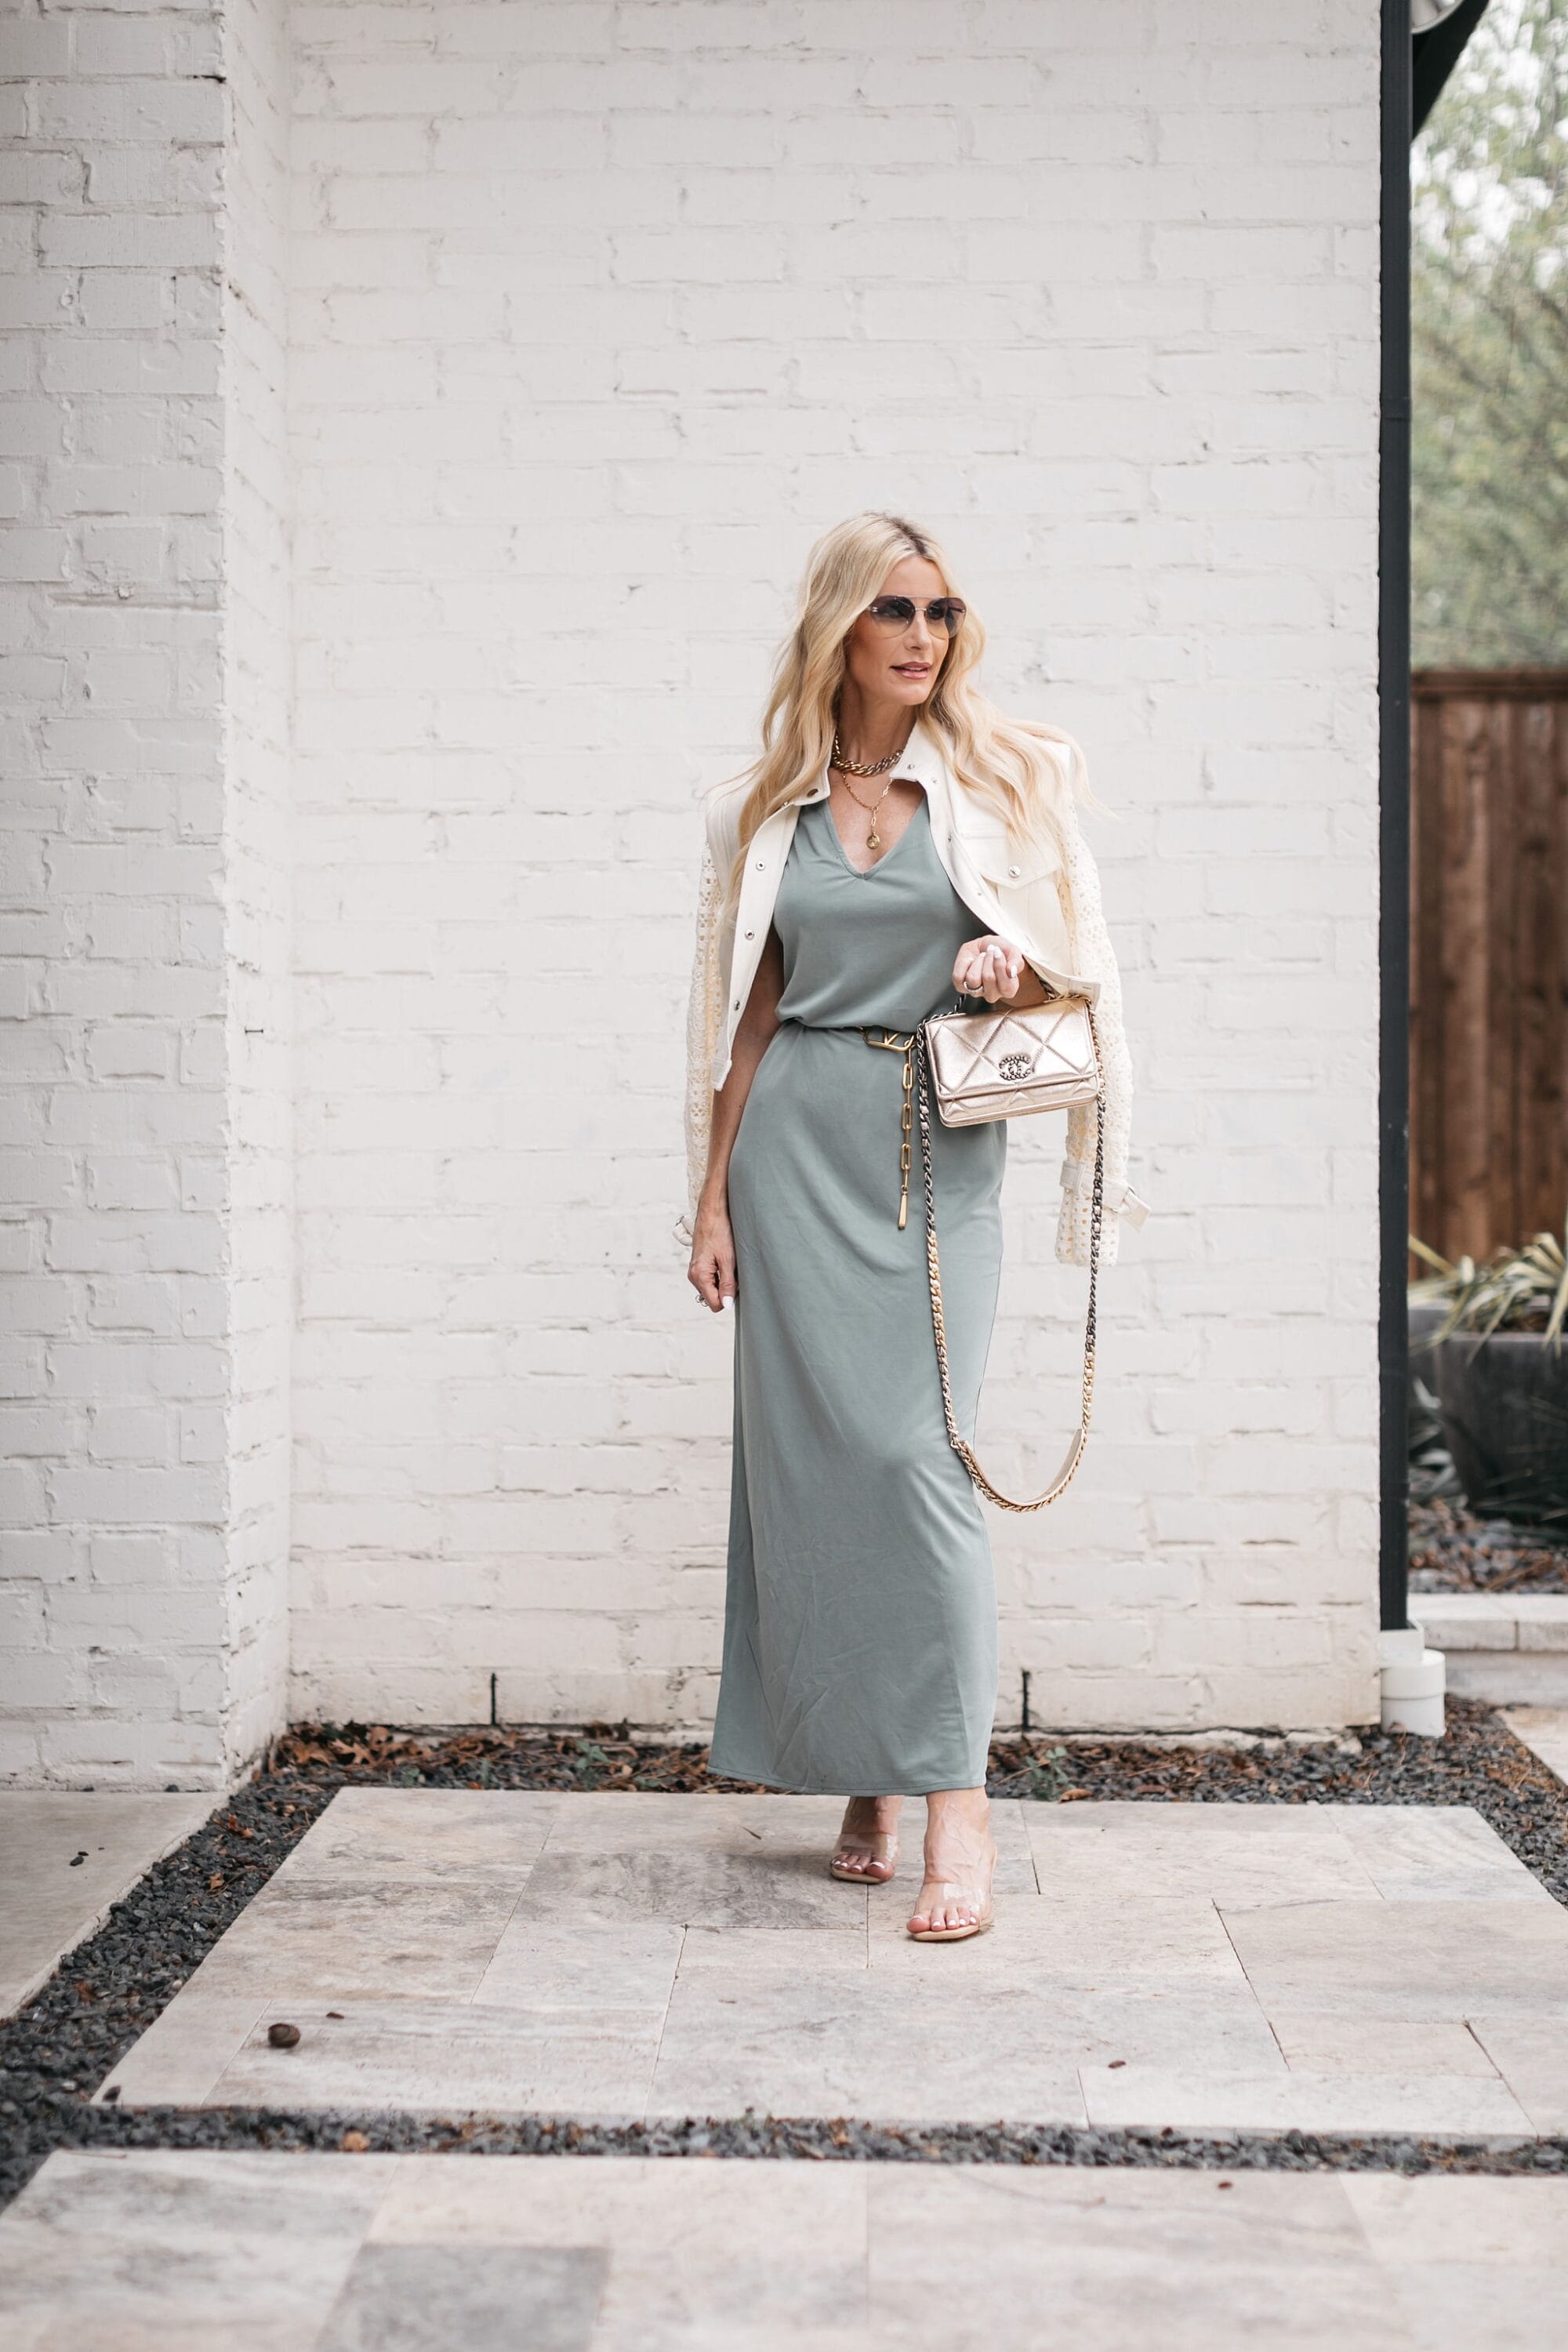 over 40 woman modeling what to wear to mother's day brunch